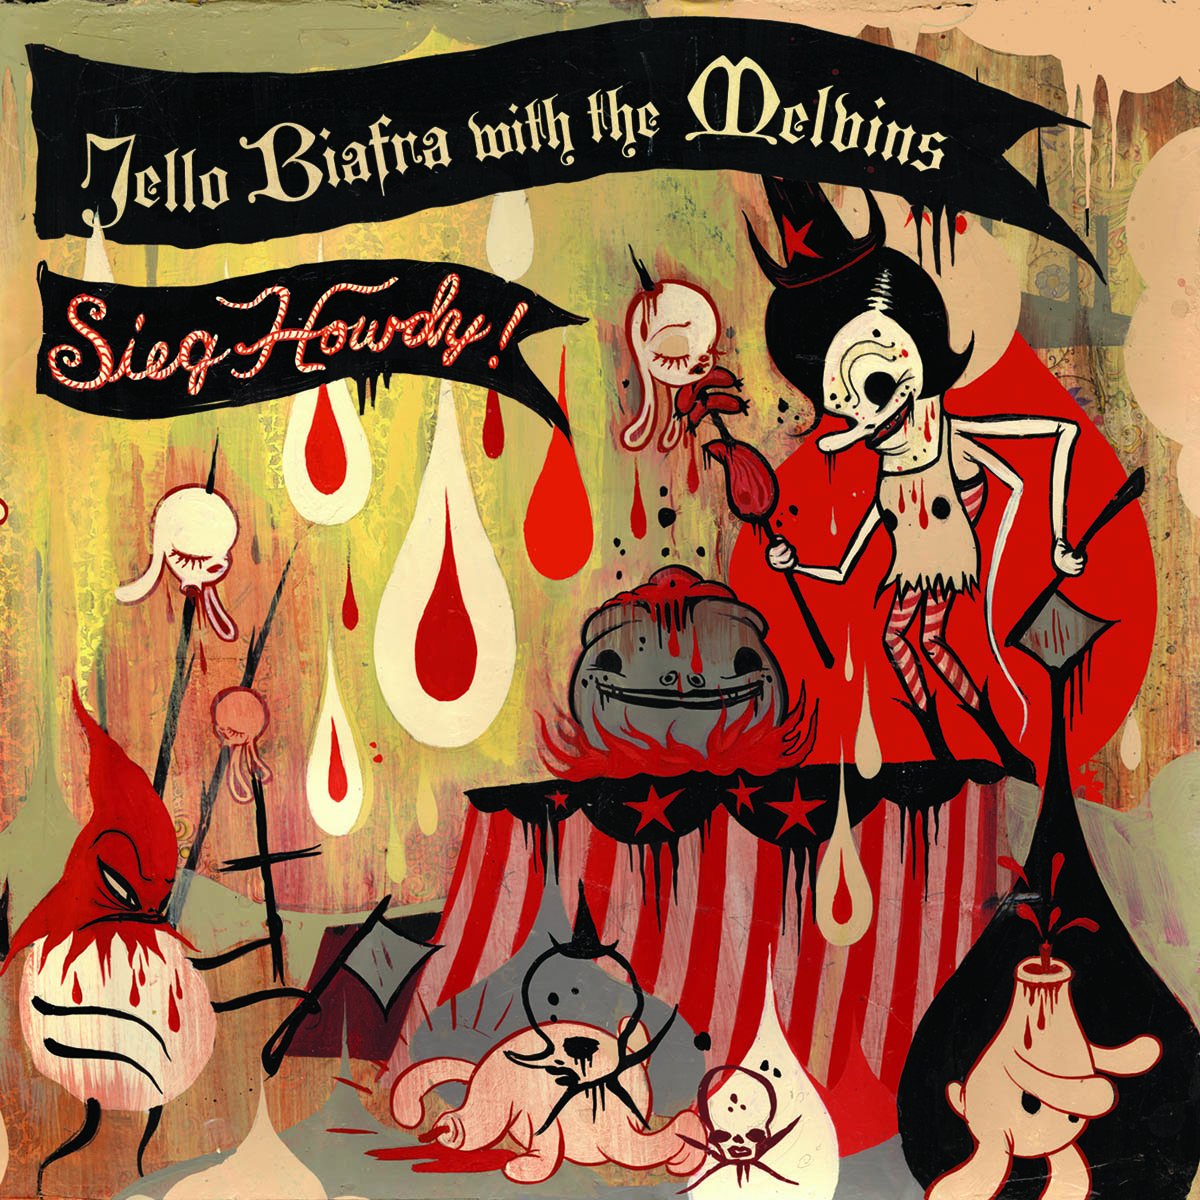 Jello-Biafra-with-Melvins---Sieg-Howdy